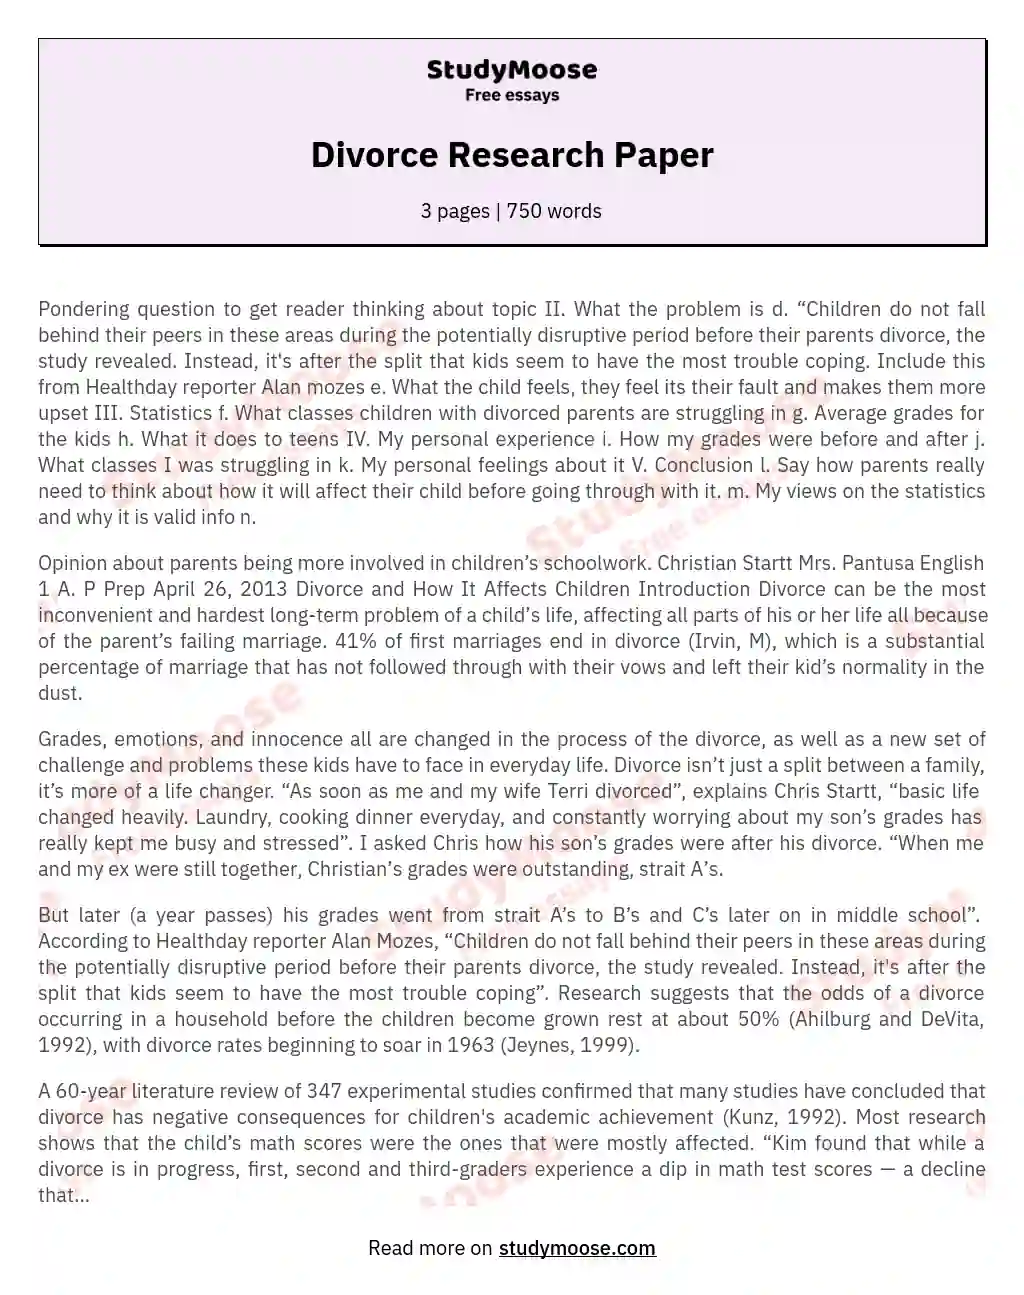 research paper topics on divorce